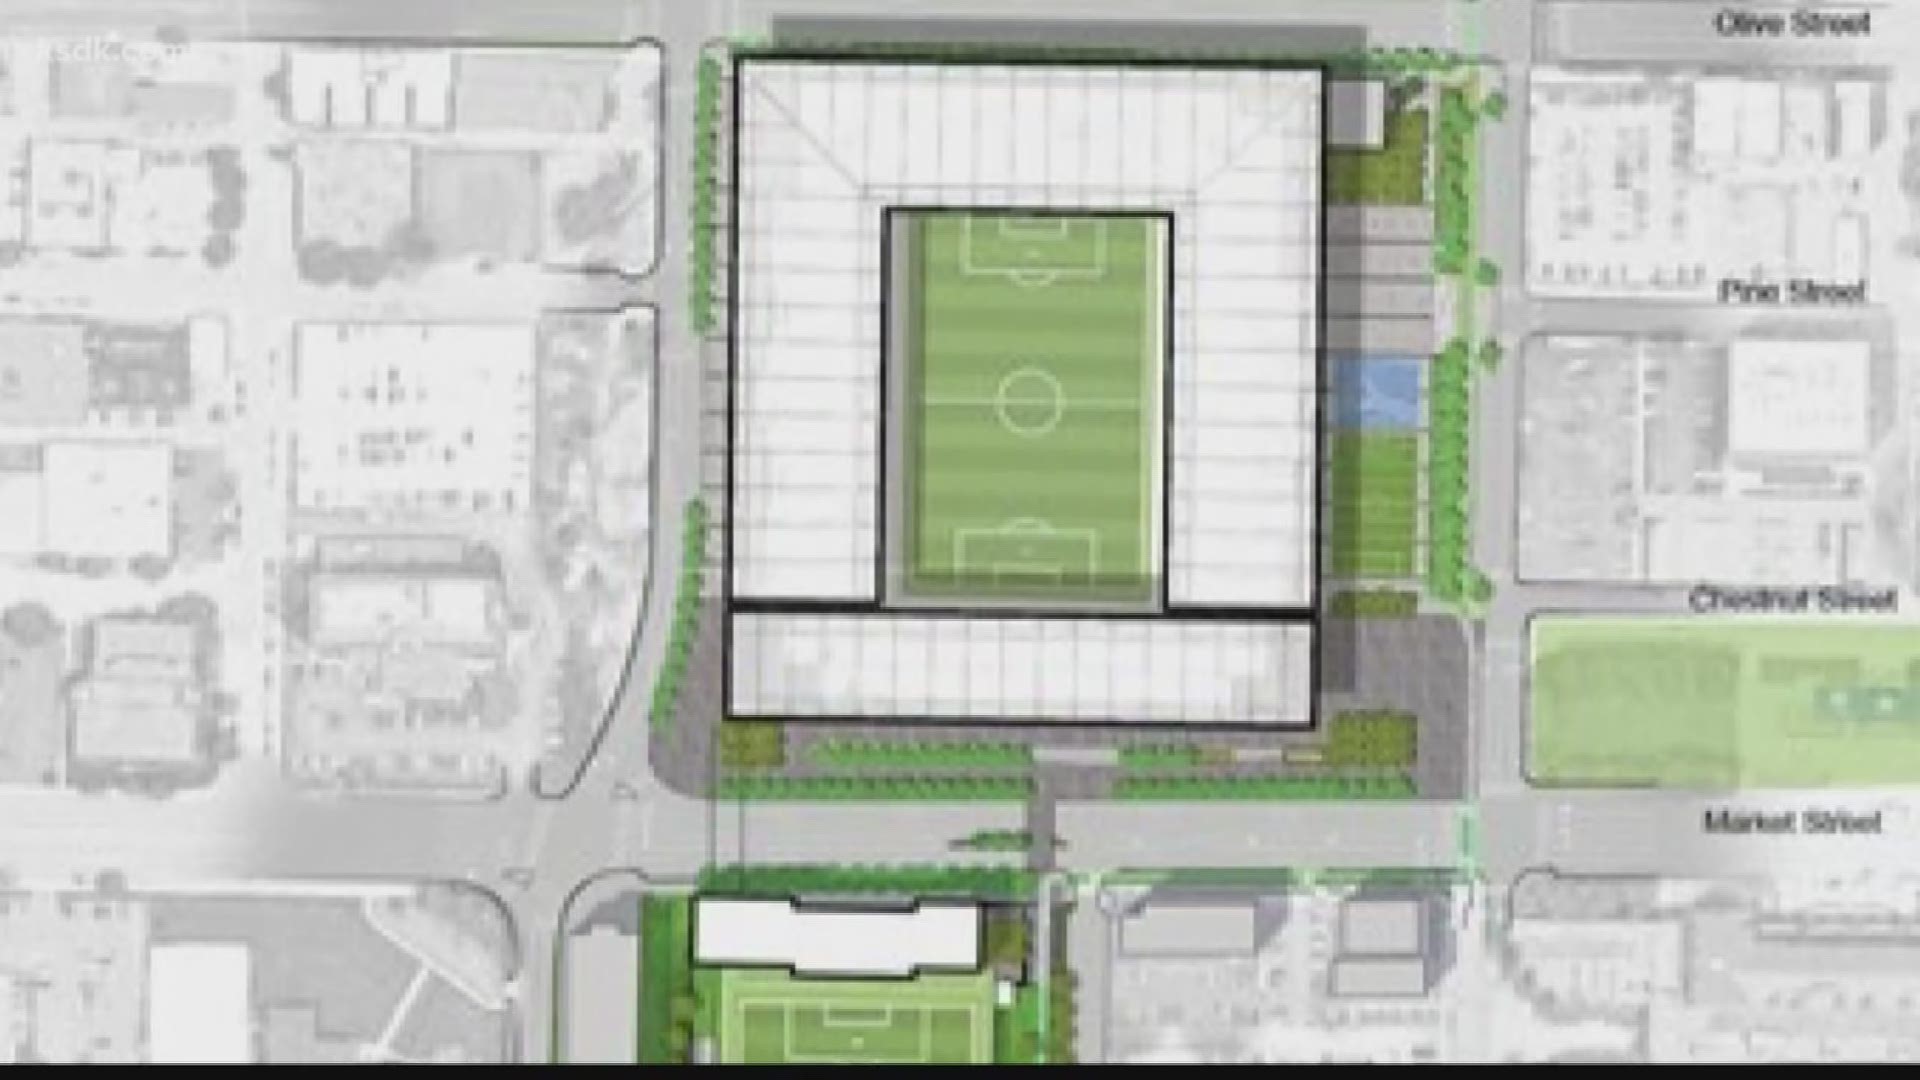 The newest renderings for the St. Louis MLS stadium show it being located north of Market Street near Union Station, with practice fields to the south.